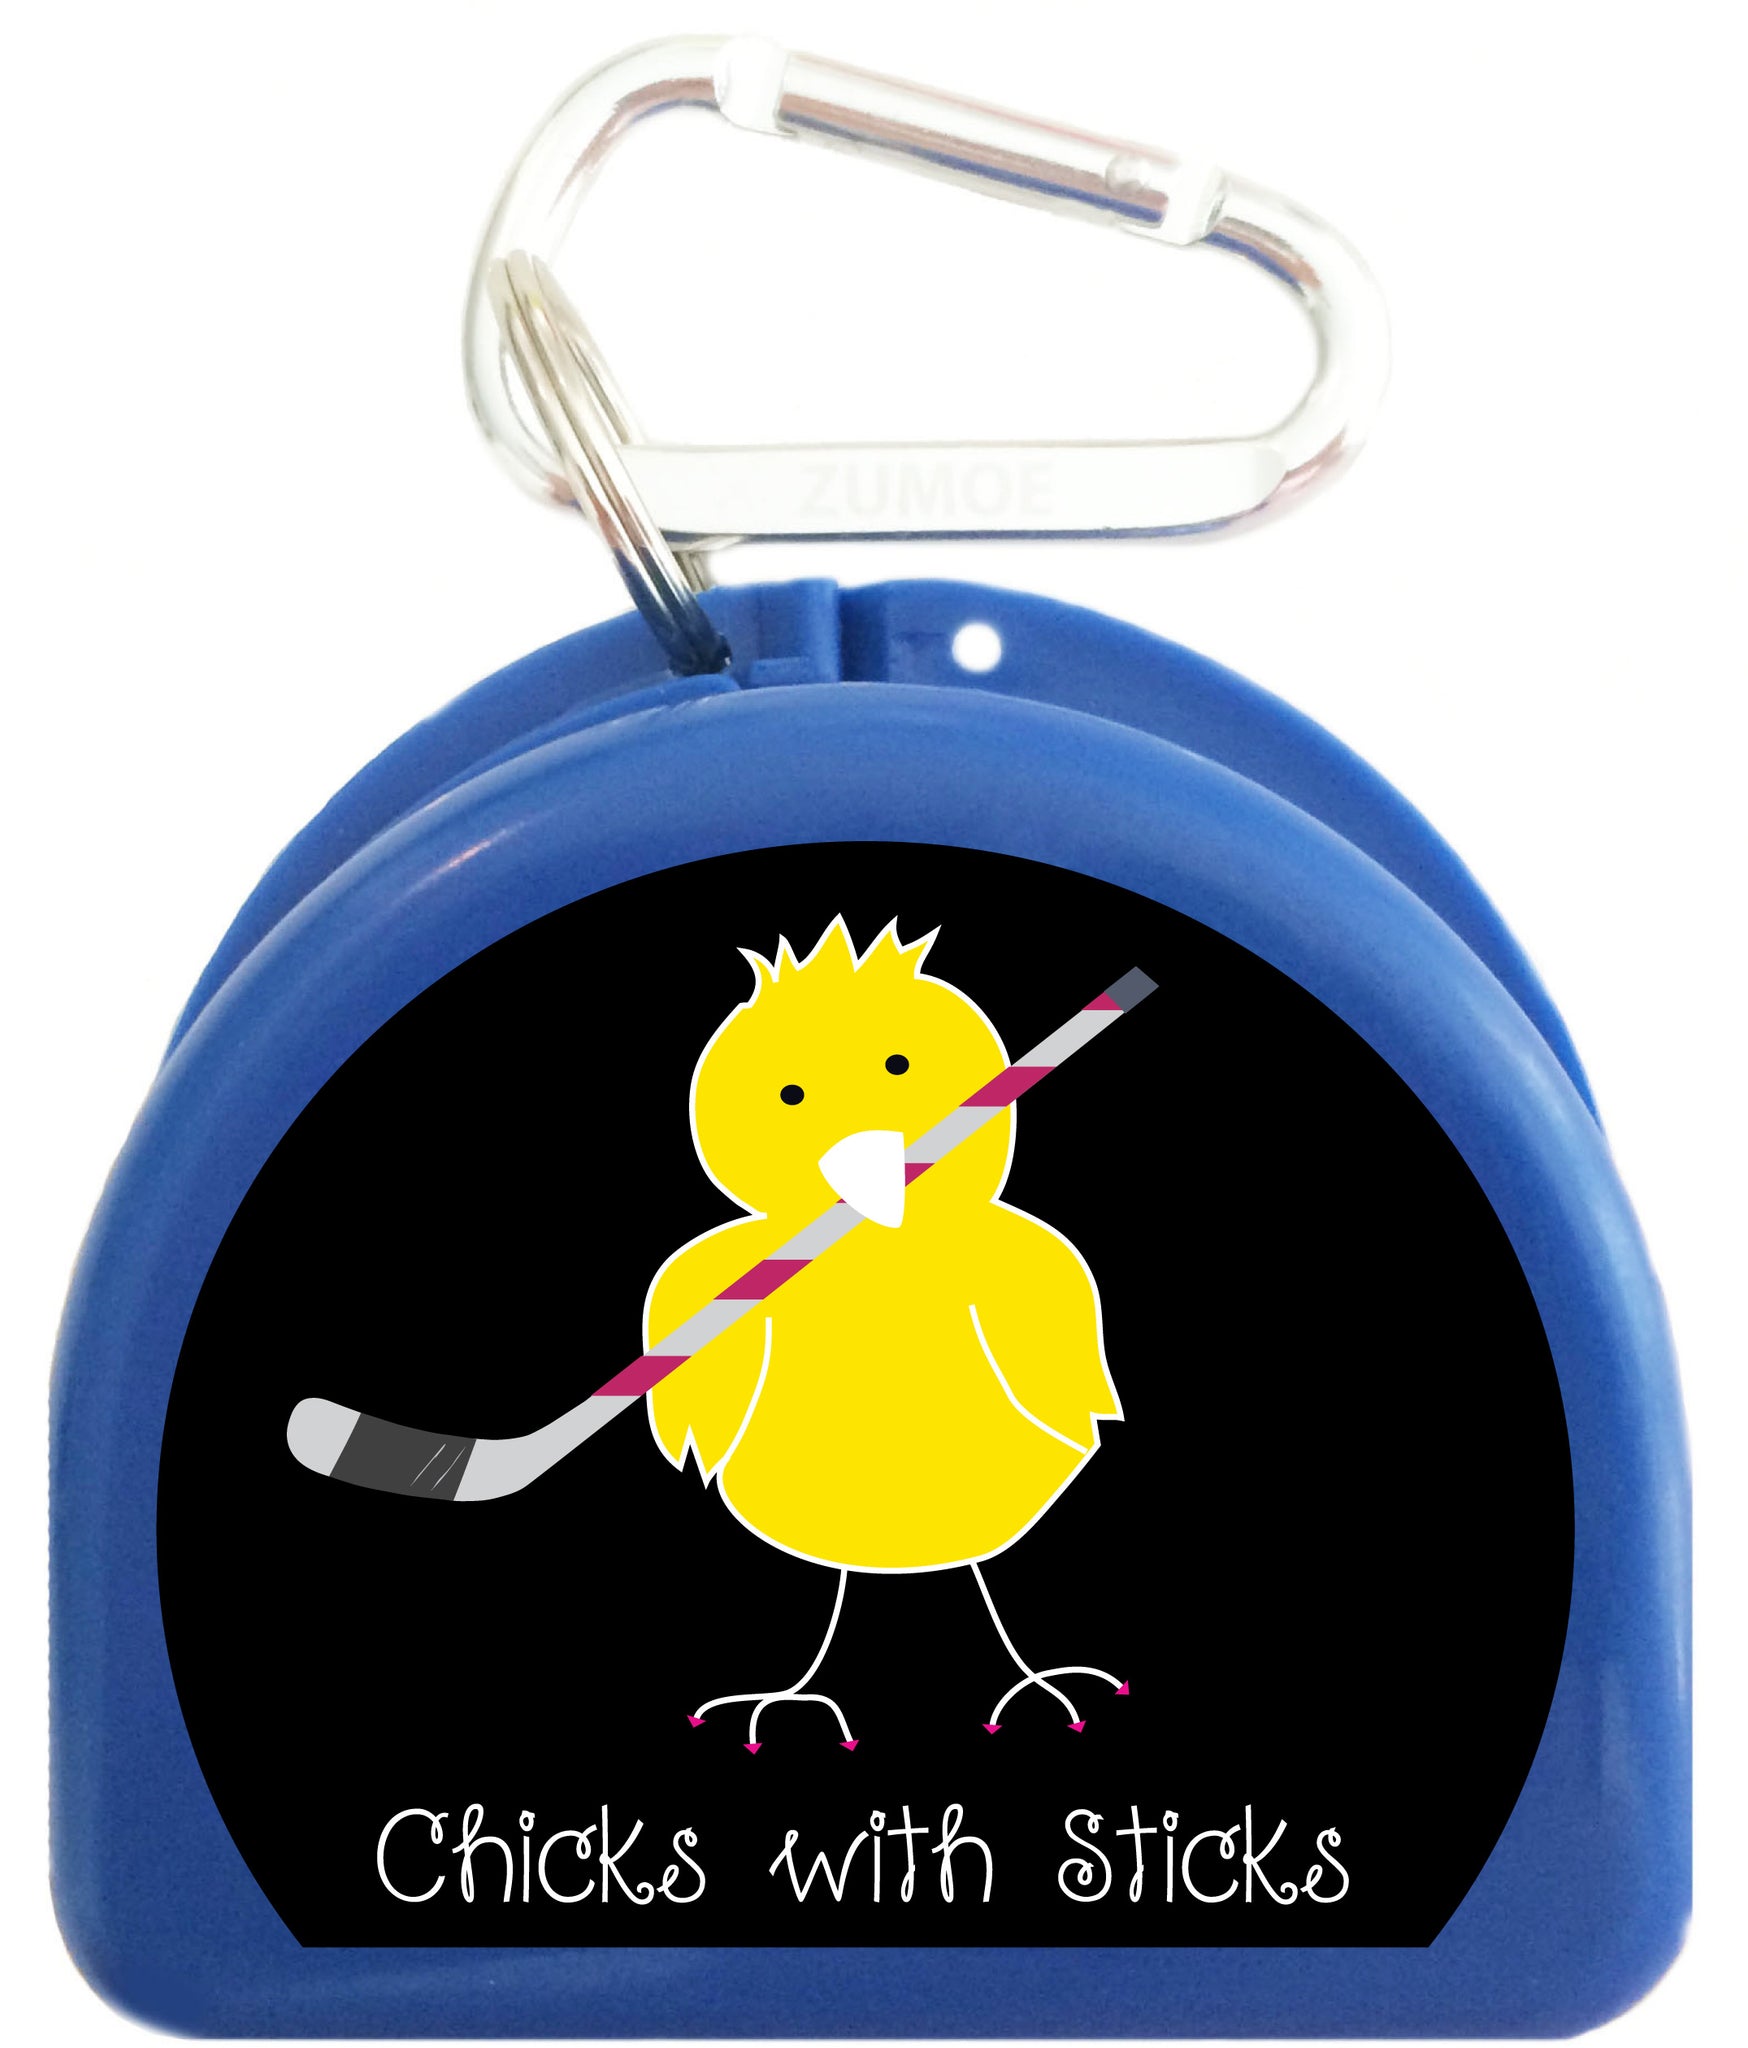 Pacifier Case - Chick with Ice Hockey Stick - 628-B